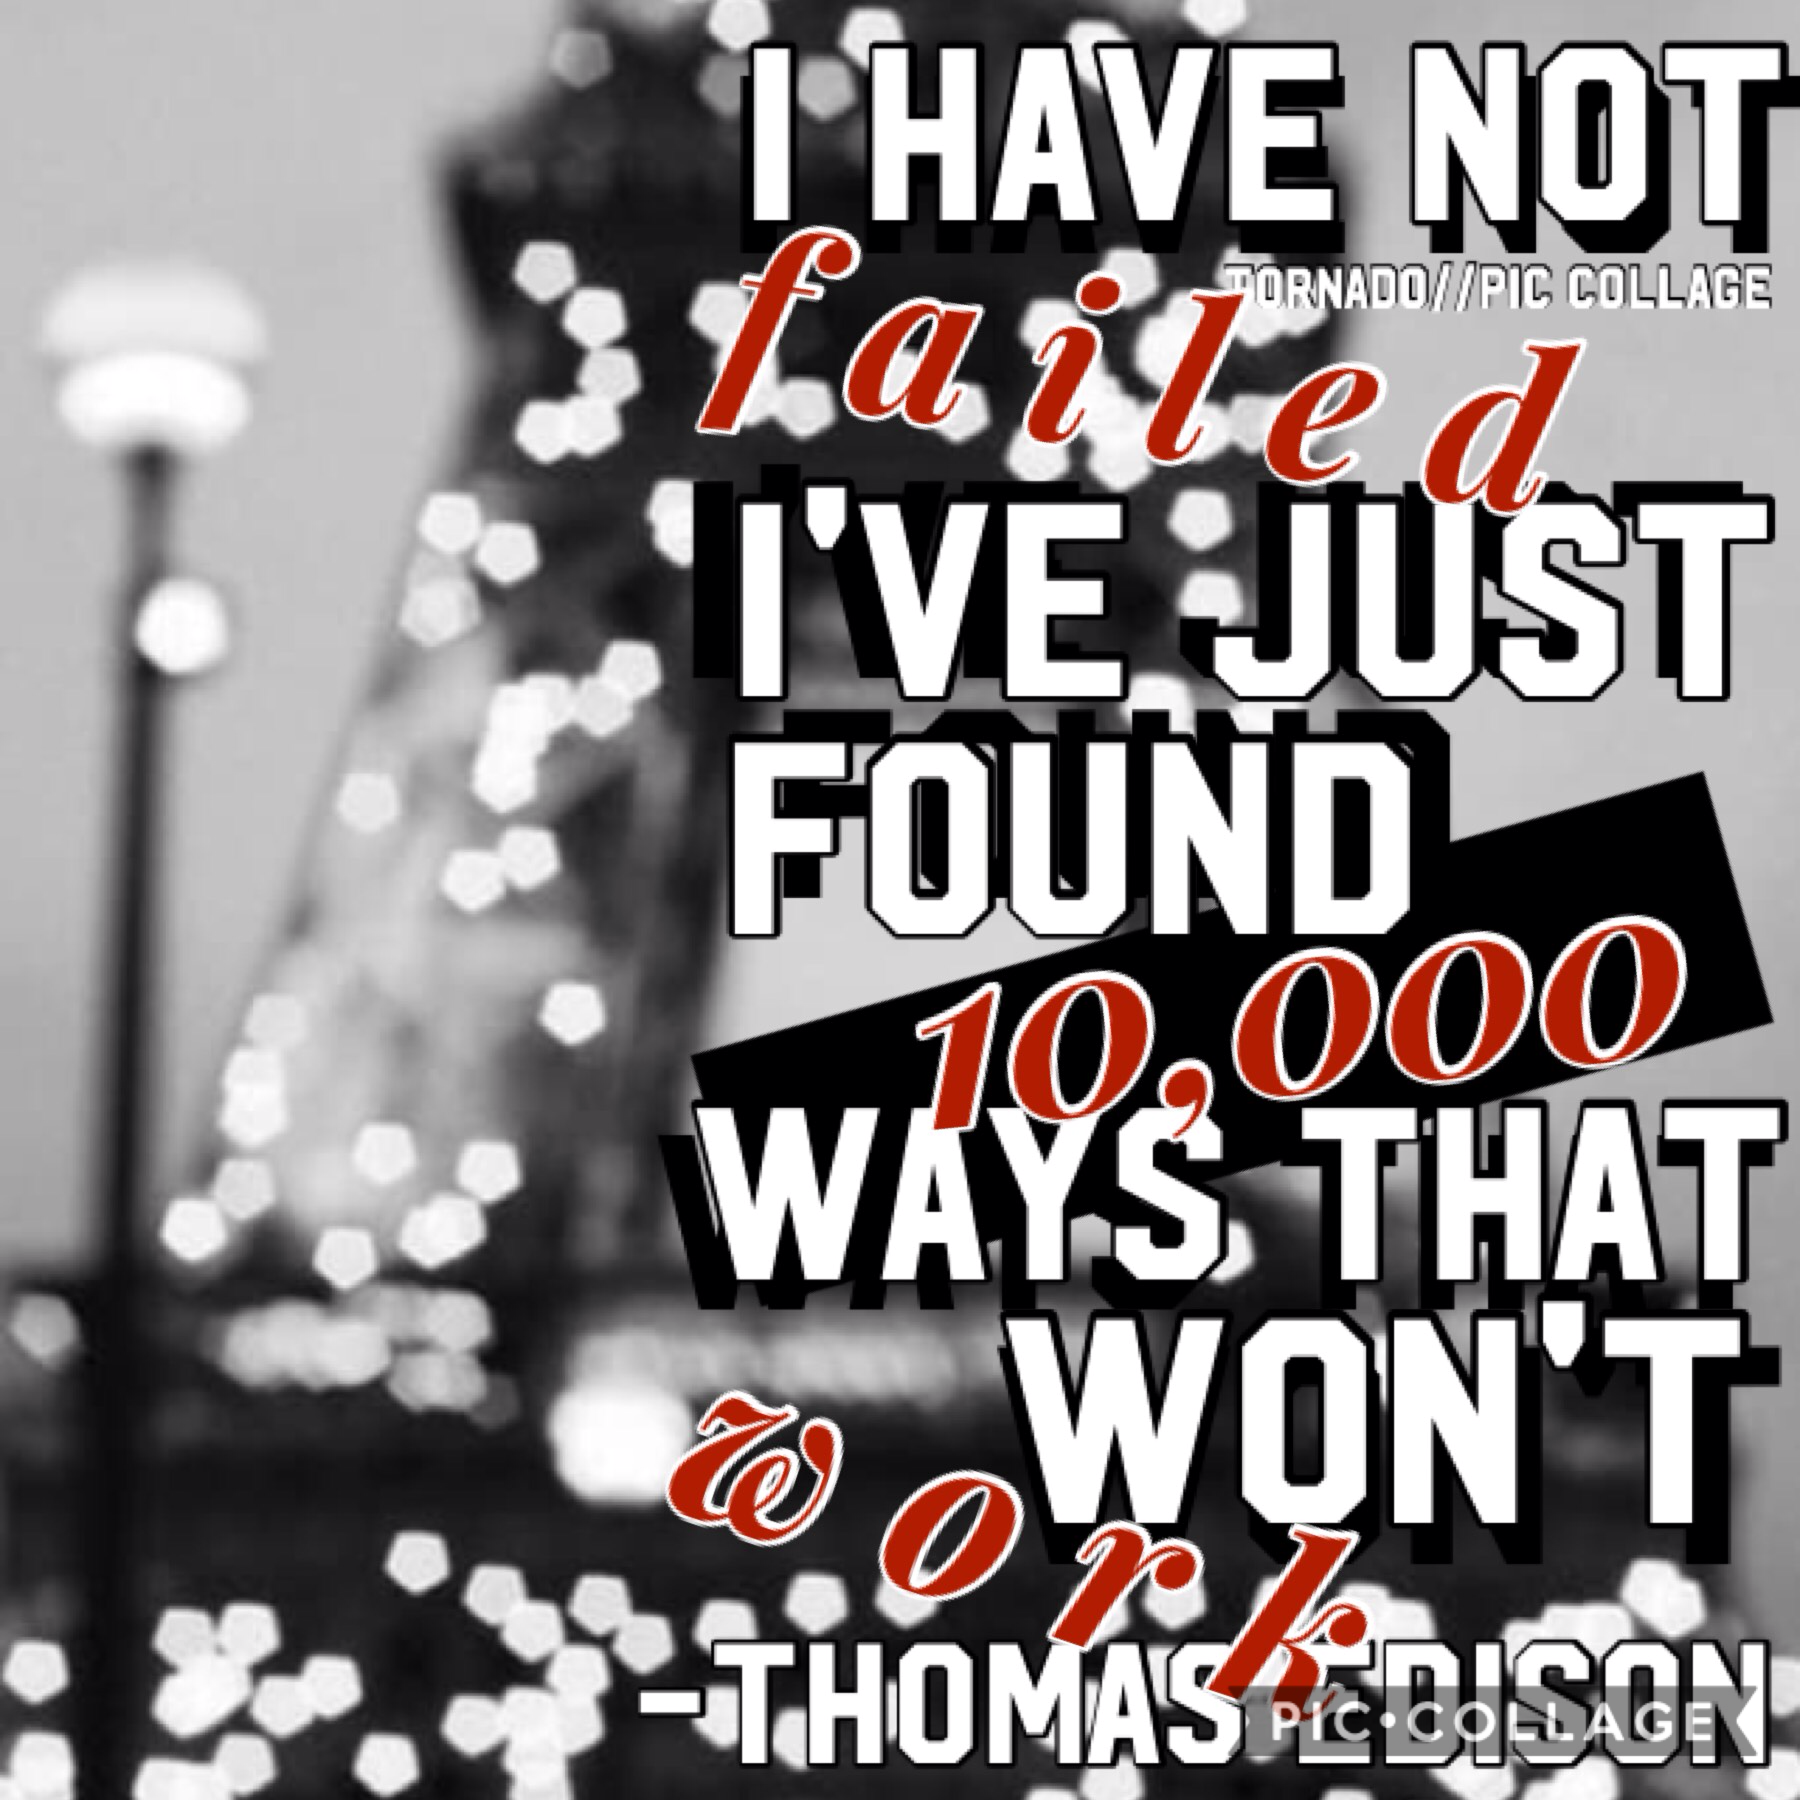 [10/24/18]
Quote by Thomas Edison!
📷photo credit: @--INSPIRATIONAL--📷
HAPPY WEDNESDAY❤️😂